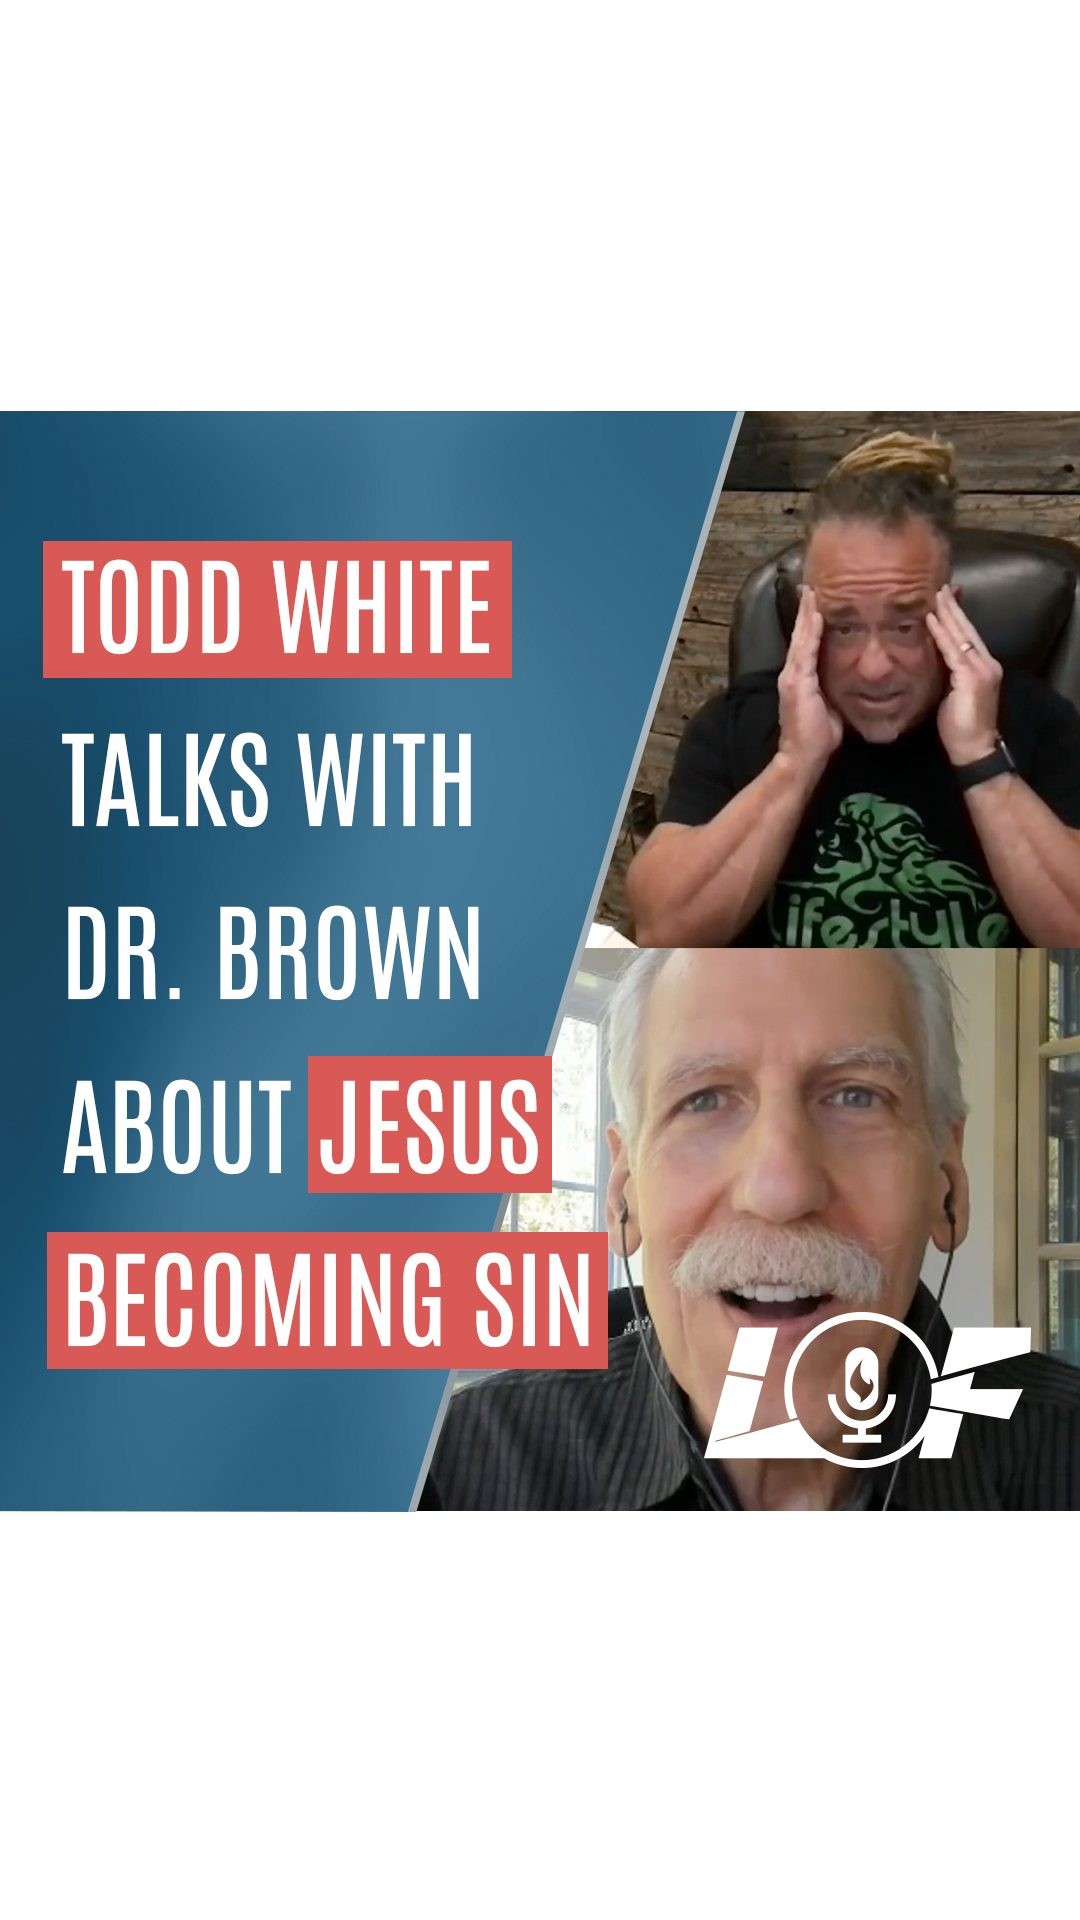 Todd White Talks With Dr. Brown About Jesus Becoming SinA few months ago, Todd White made some controversial comments on 2 Cor 5:21 and Jesus becoming sin. Check out Dr. Brown and Todd White discussing what Paul was really saying. FULL VIDEO IN BIO#askdrbrown #newvideo #toddwhite #jesus #jesuschrist #sin